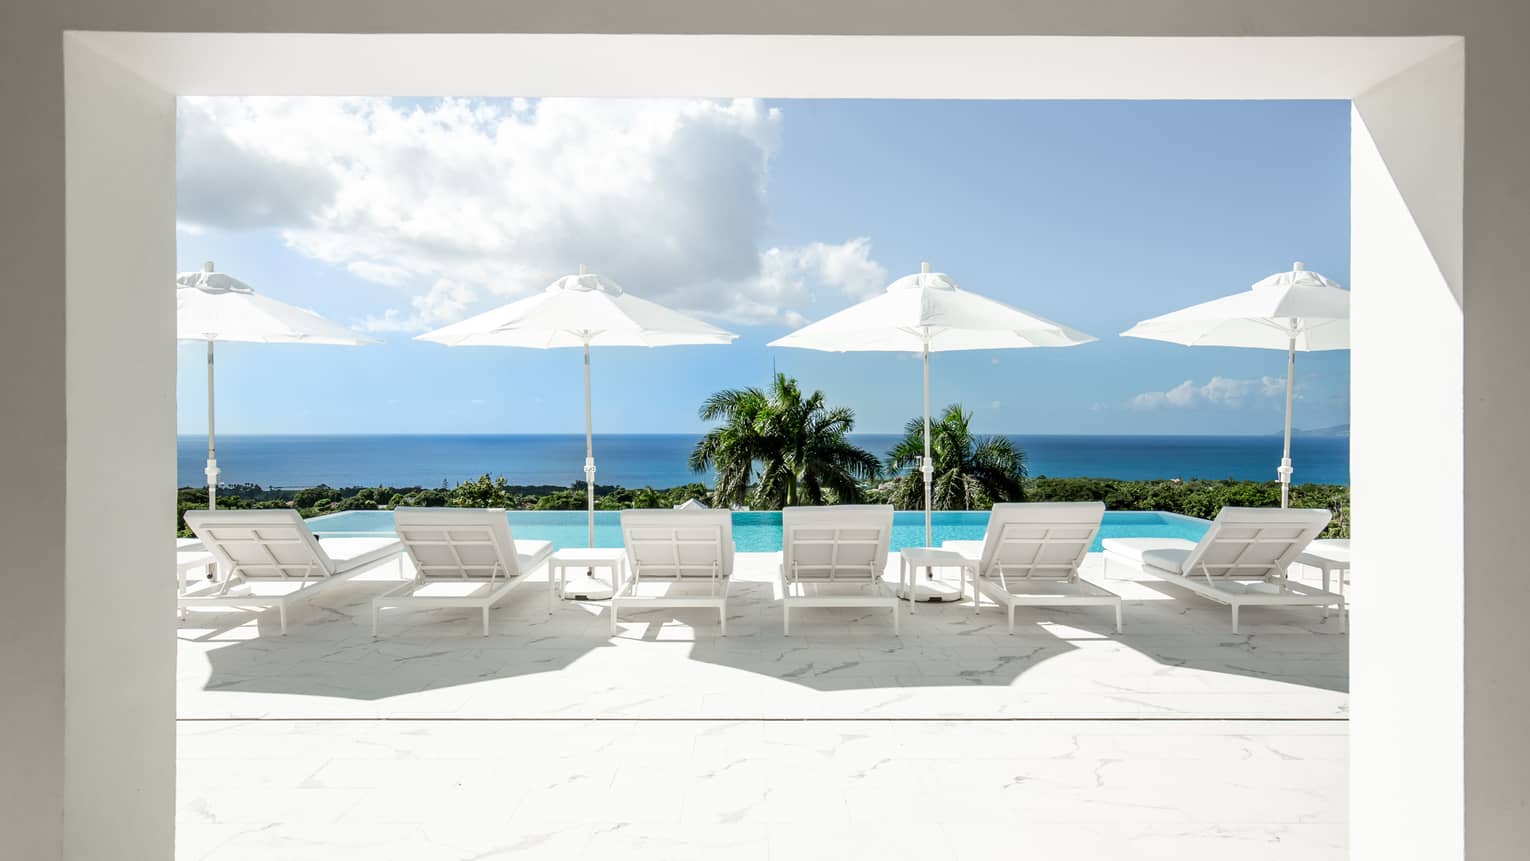 Private pool deck with six lounge chairs, four umbrellas and sea view